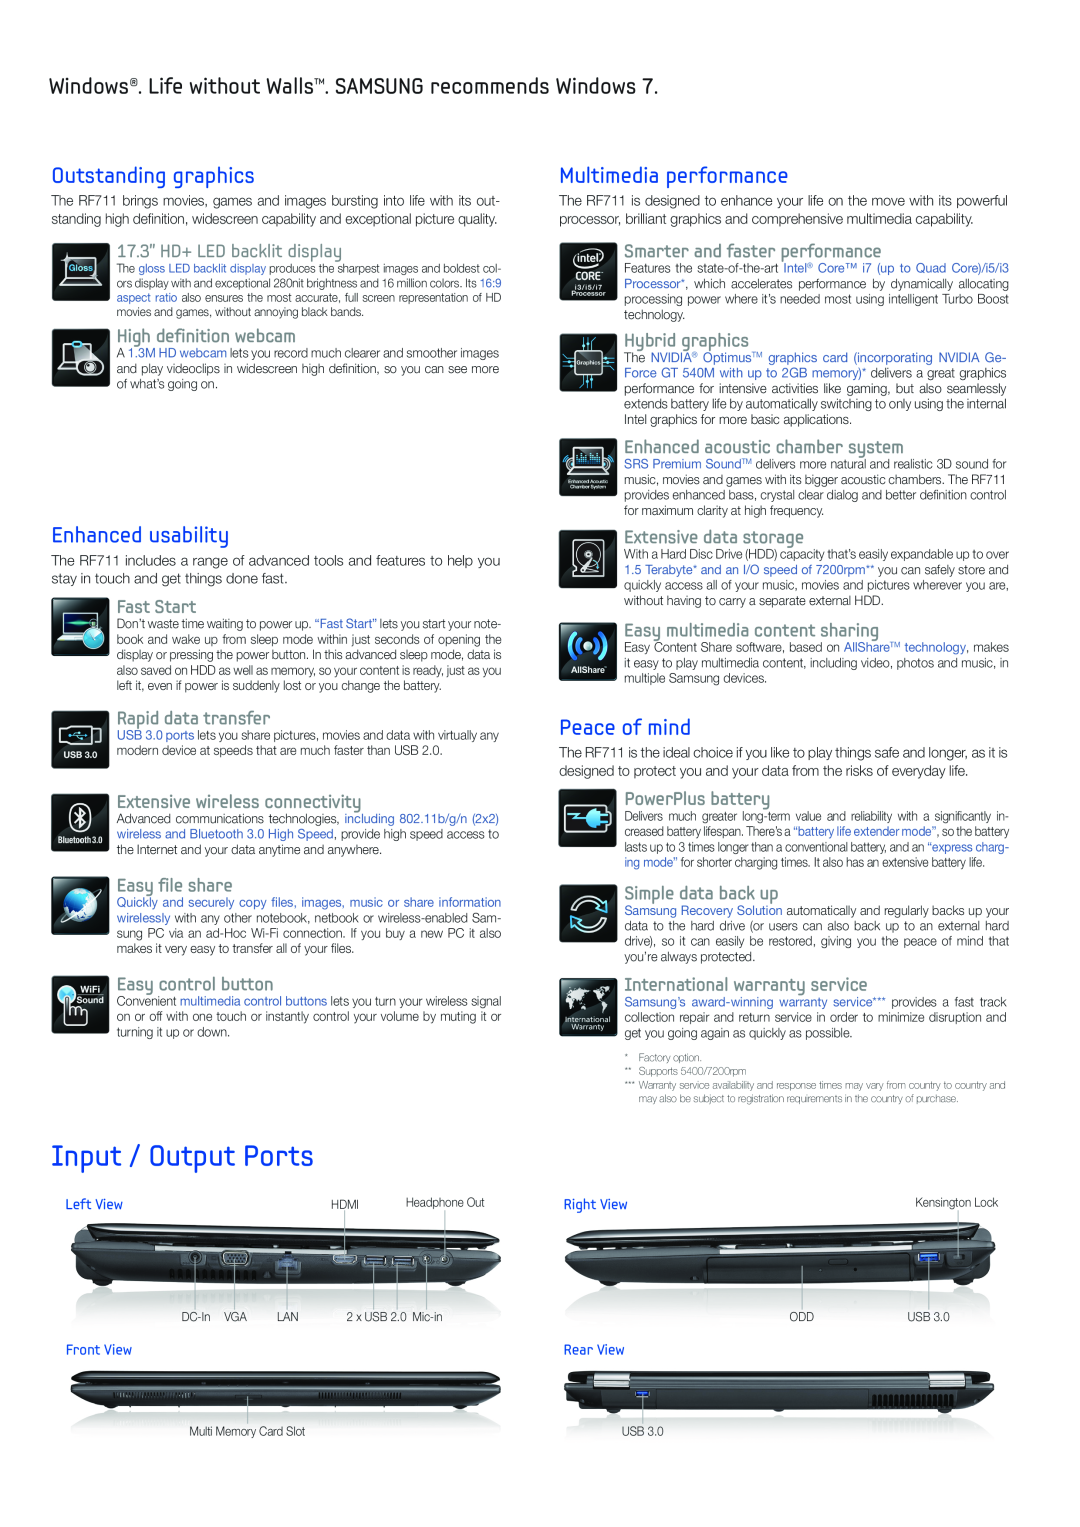 Samsung NPRF711S01US Input / Output Ports, Windows. Life without Walls. SAMSUNG recommends Windows, Outstanding graphics 